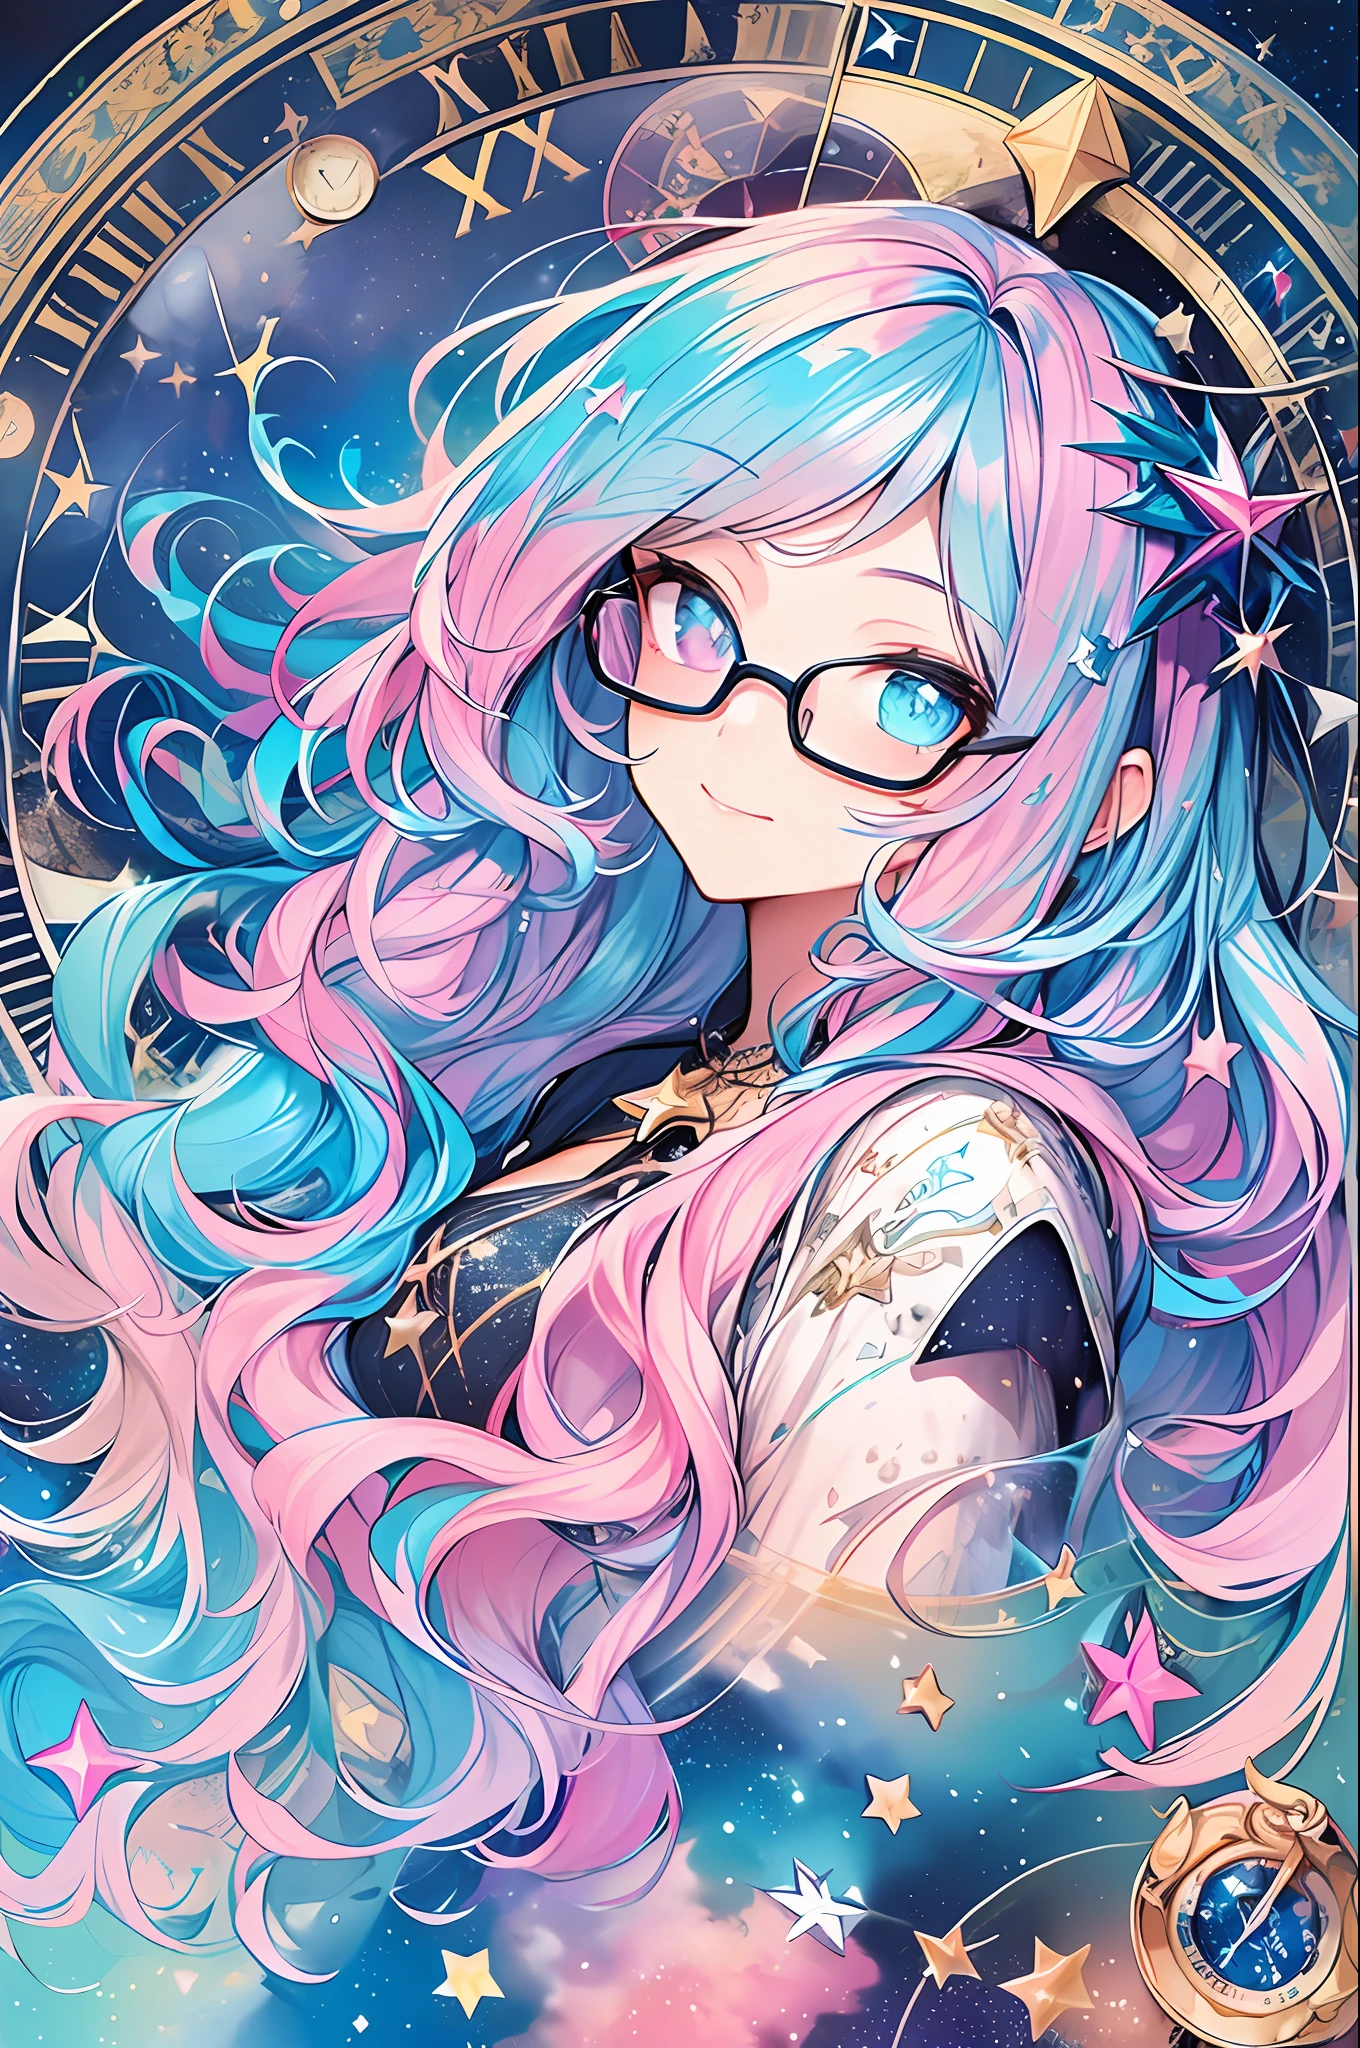 (Masterpiece, Highest Quality, Best Quality, Watercolor Art (Pendant), Official Art, Beautiful and Aesthetic, (1.3), (1 Girl: 1.3), (Fractal Art: 1.3), Full Body, Star-shaped Pupil, , Pattern, ((iridescent hair, colorful hair, half blue and half pink hair: 1.2)), Aqua, Liquid, Cloud, Colorful, Starry Night, Star, Smile, Glasses, Writing, Heterochromia, (Colorful: 1.5), galaxy, looking up at the stars, clock, big clock